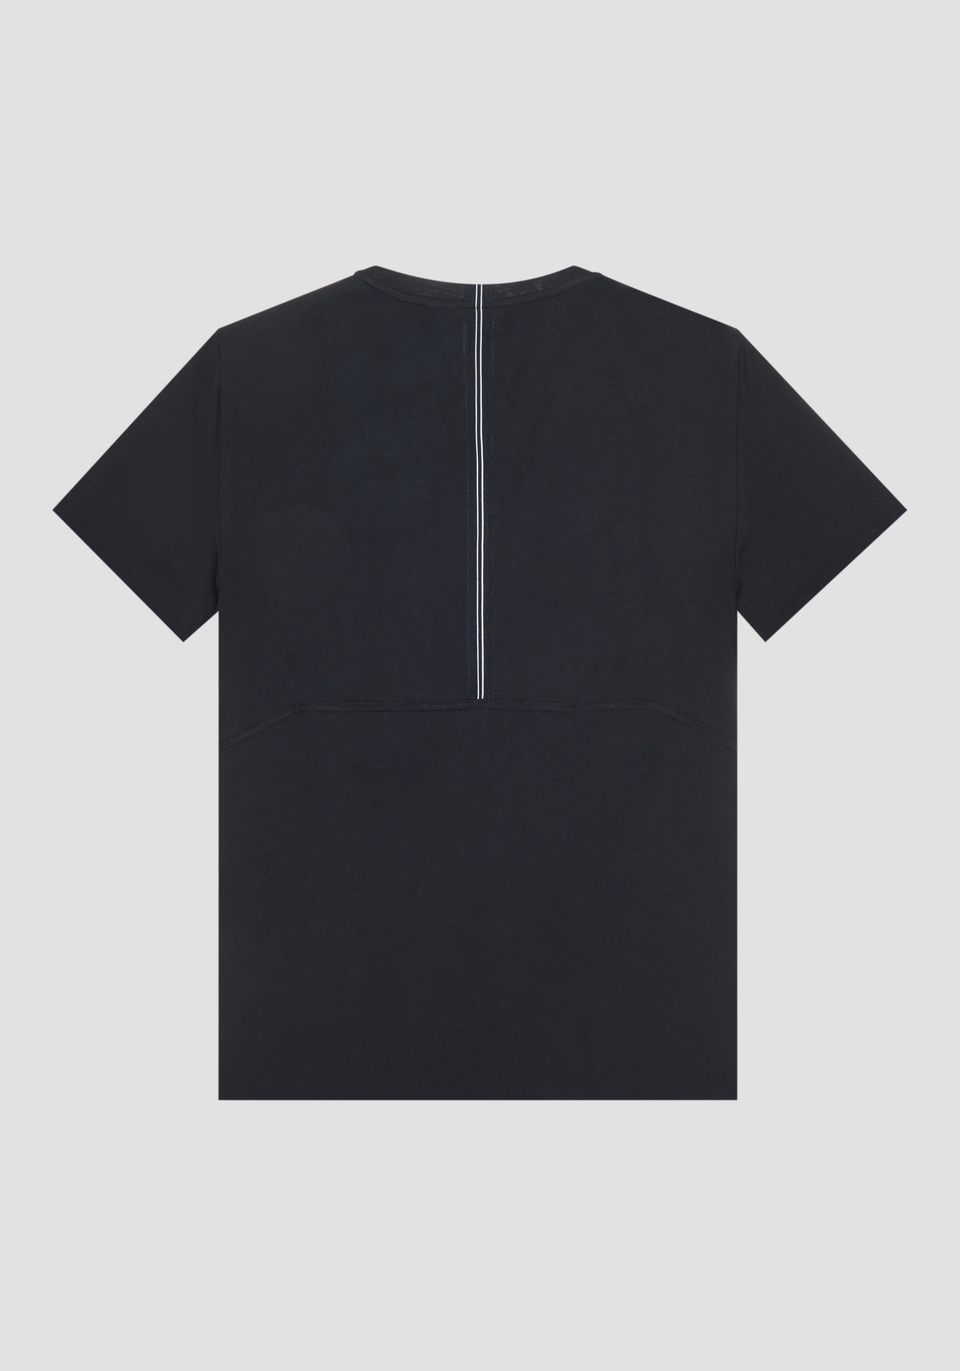 REGULAR FIT T-SHIRT IN 100% COTTON WITH CONTRASTING POCKET - Antony Morato Online Shop